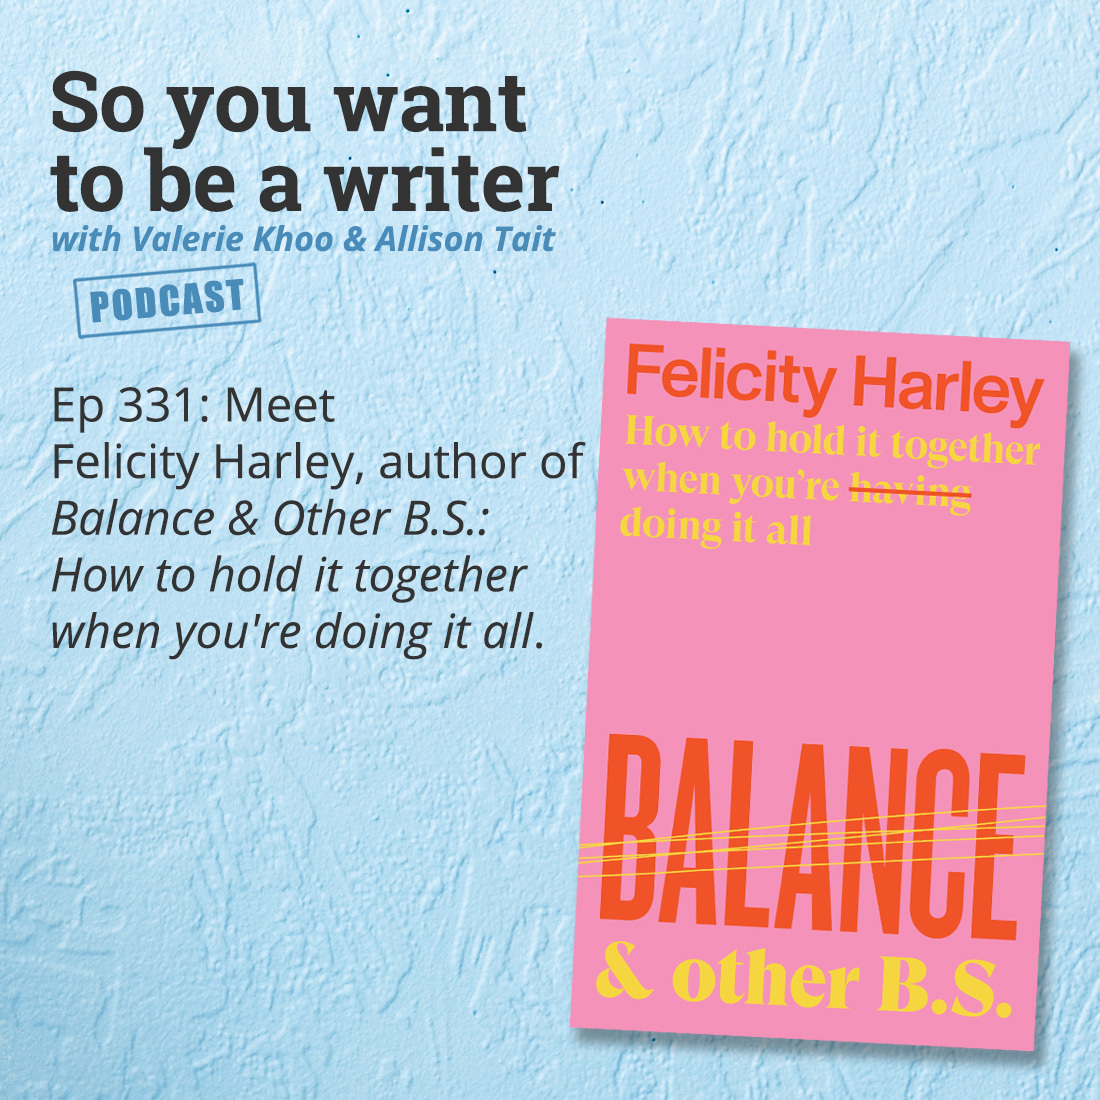 WRITER 331: Meet Felicity Harley, author of 'Balance & Other B.S.: How to hold it together when you're doing it all'.